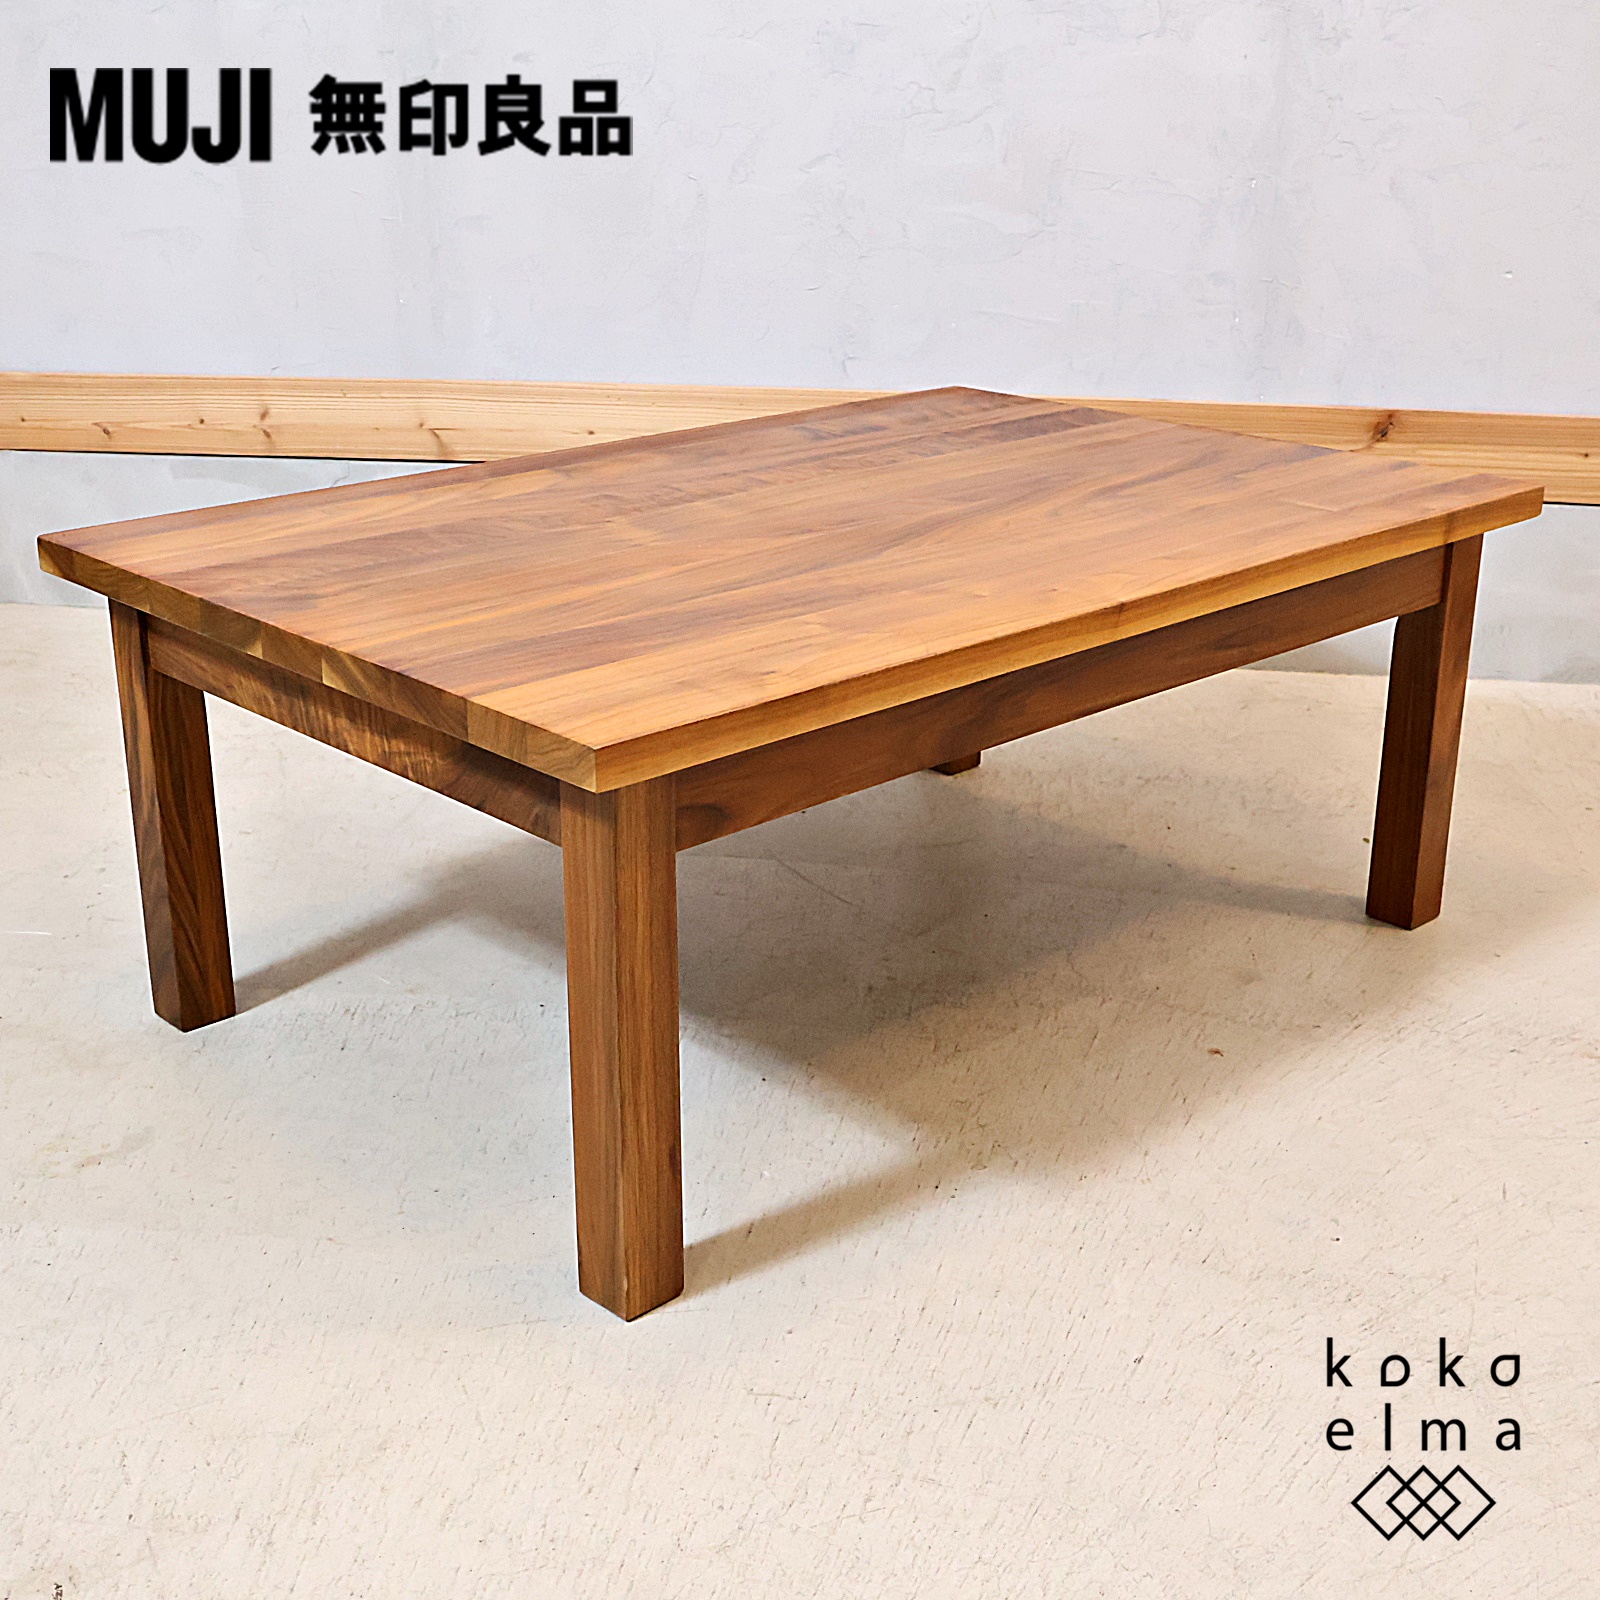  Muji Ryohin MUJI walnut natural wood low table drawer attaching living table Northern Europe style simple modern casual Cafe manner ED210